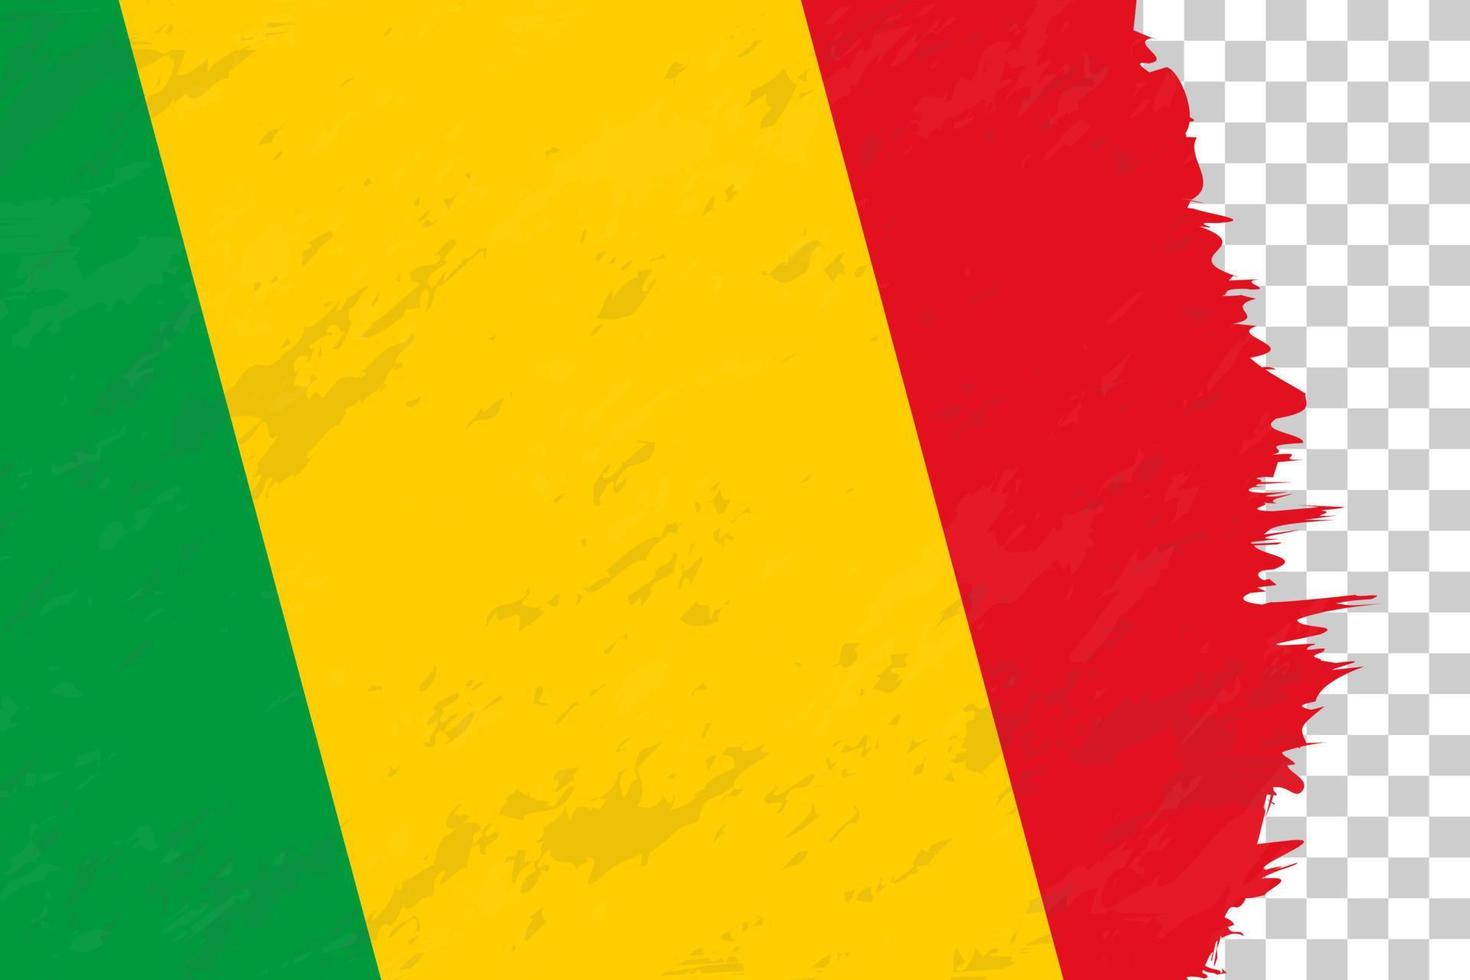 Horizontal Abstract Grunge Brushed Flag of Mali on Transparent Grid. vector